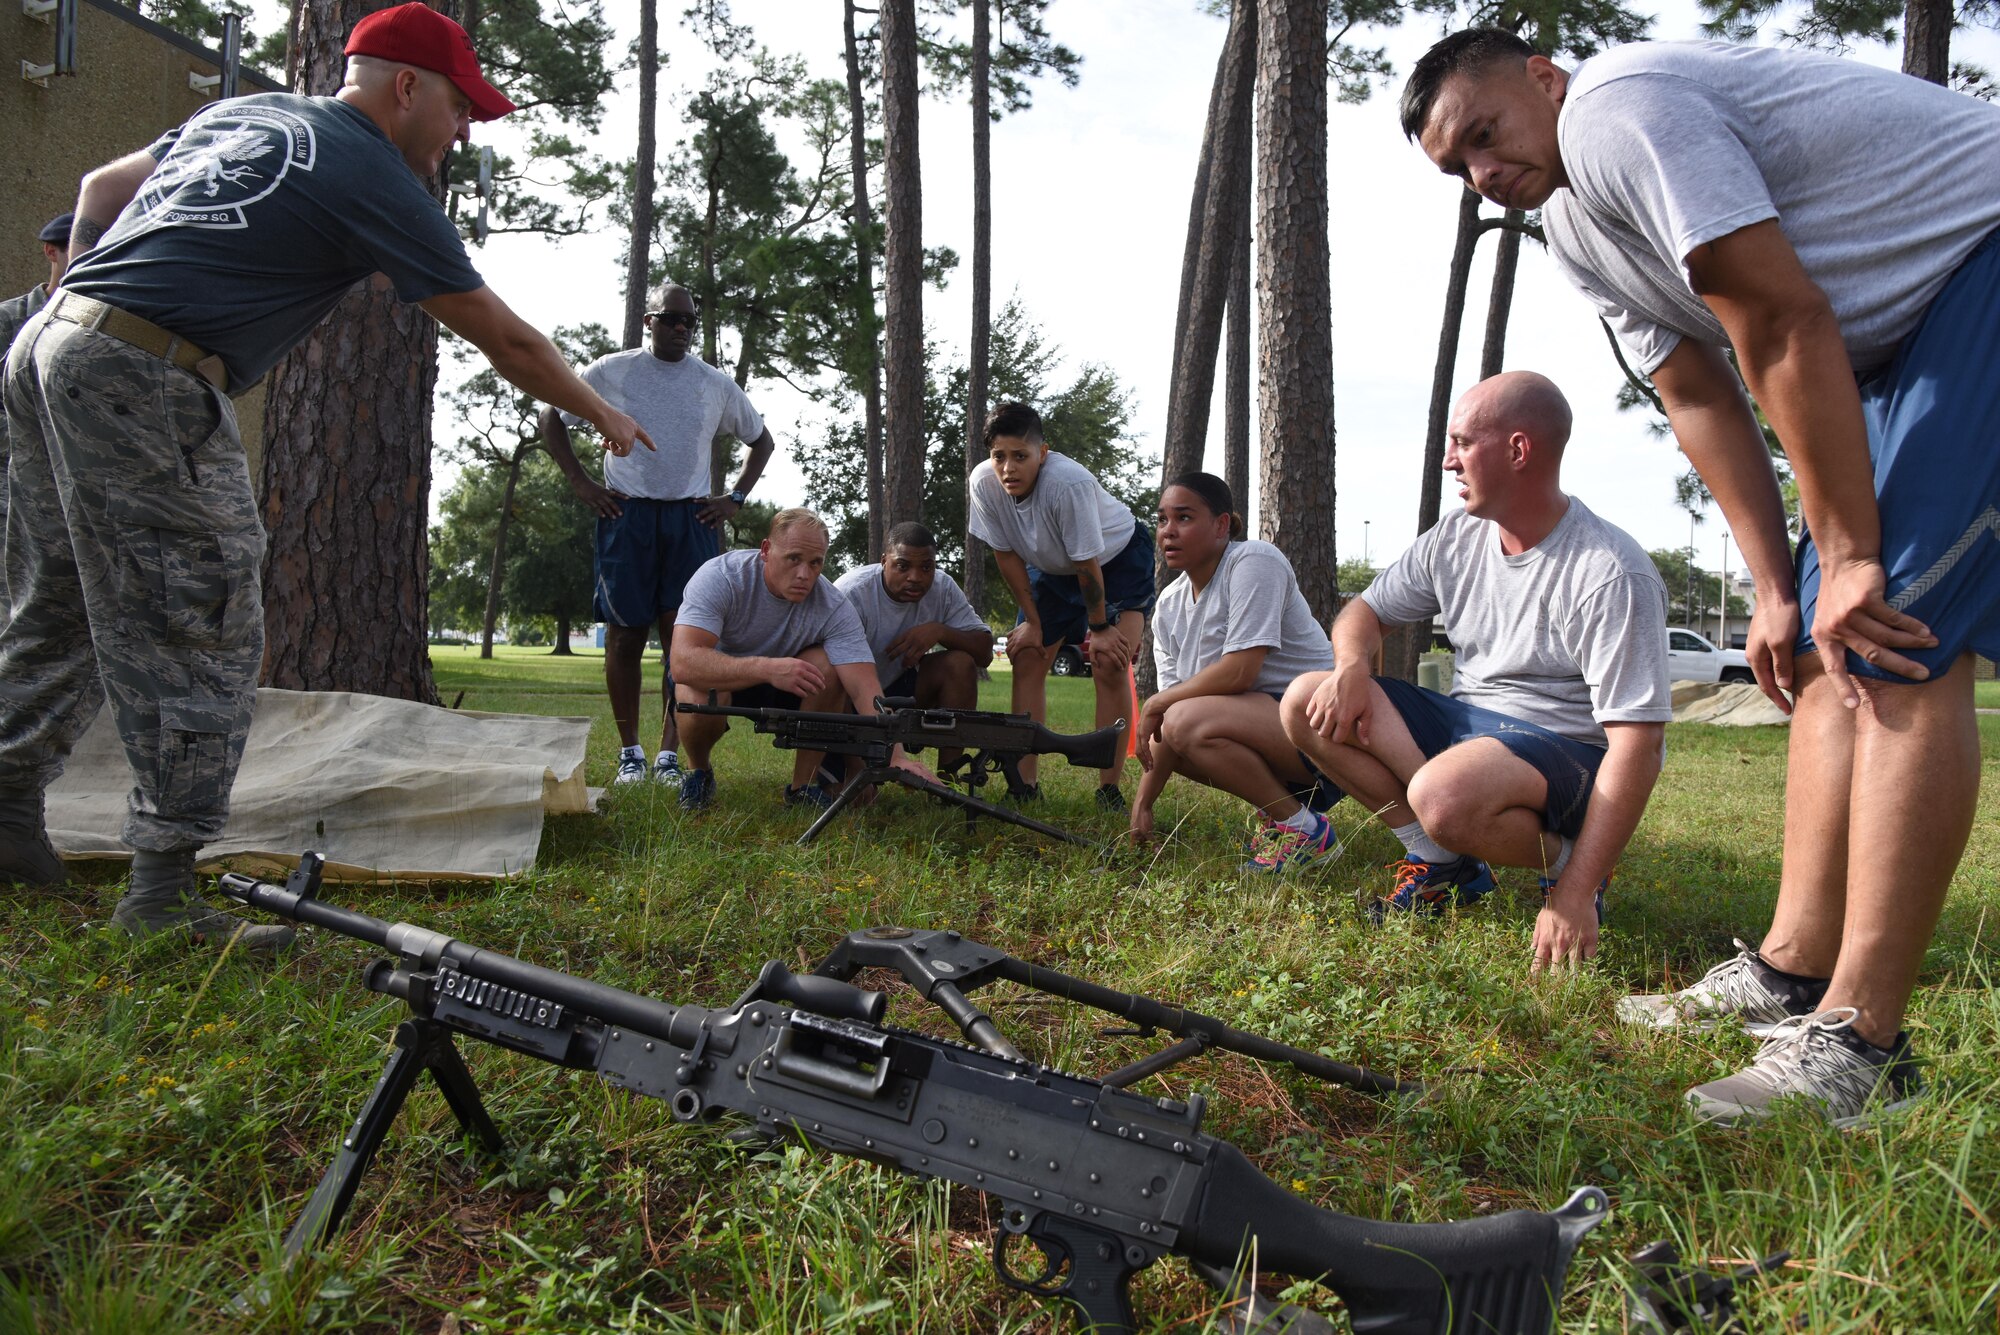 Team Five prepares to mount a 240B machine gun weapon during the Senior NCO Professional Enhancement Seminar Warrior Challenge Aug. 25, 2017, on Keesler Air Force Base, Mississippi. Keesler’s newest SNCOs also participated in physical strength activities as well as answering trivia questions about Keesler AFB and enlisted history. (U.S. Air Force photo by Kemberly Groue)